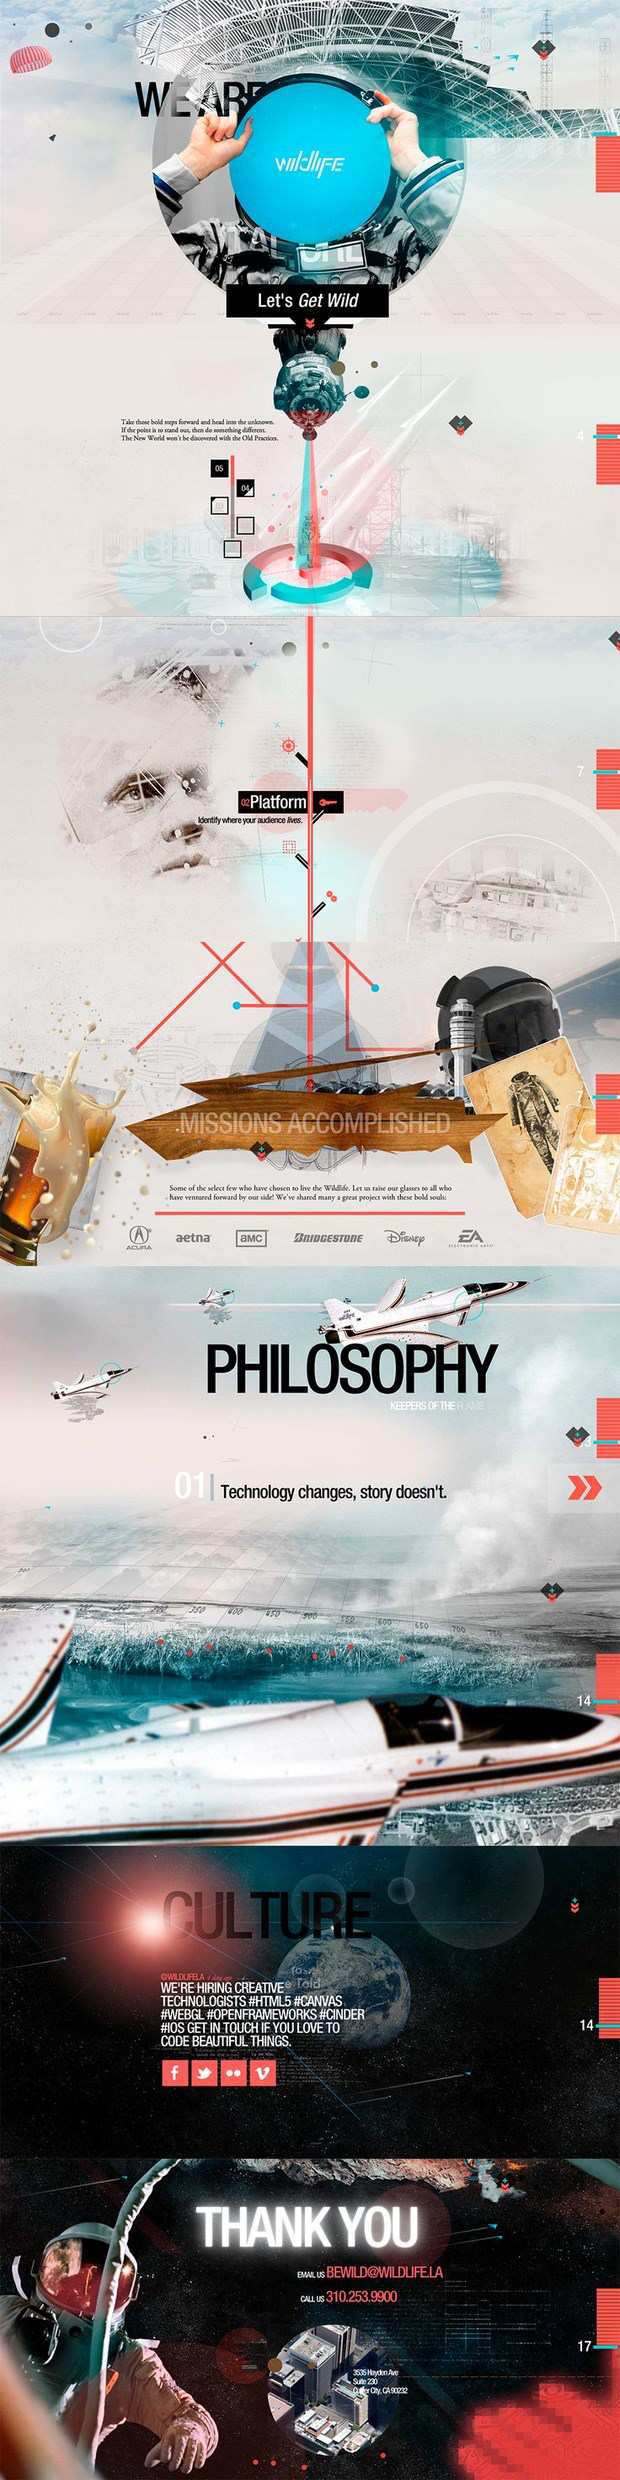 Stunning Web Design for Your Inspiration